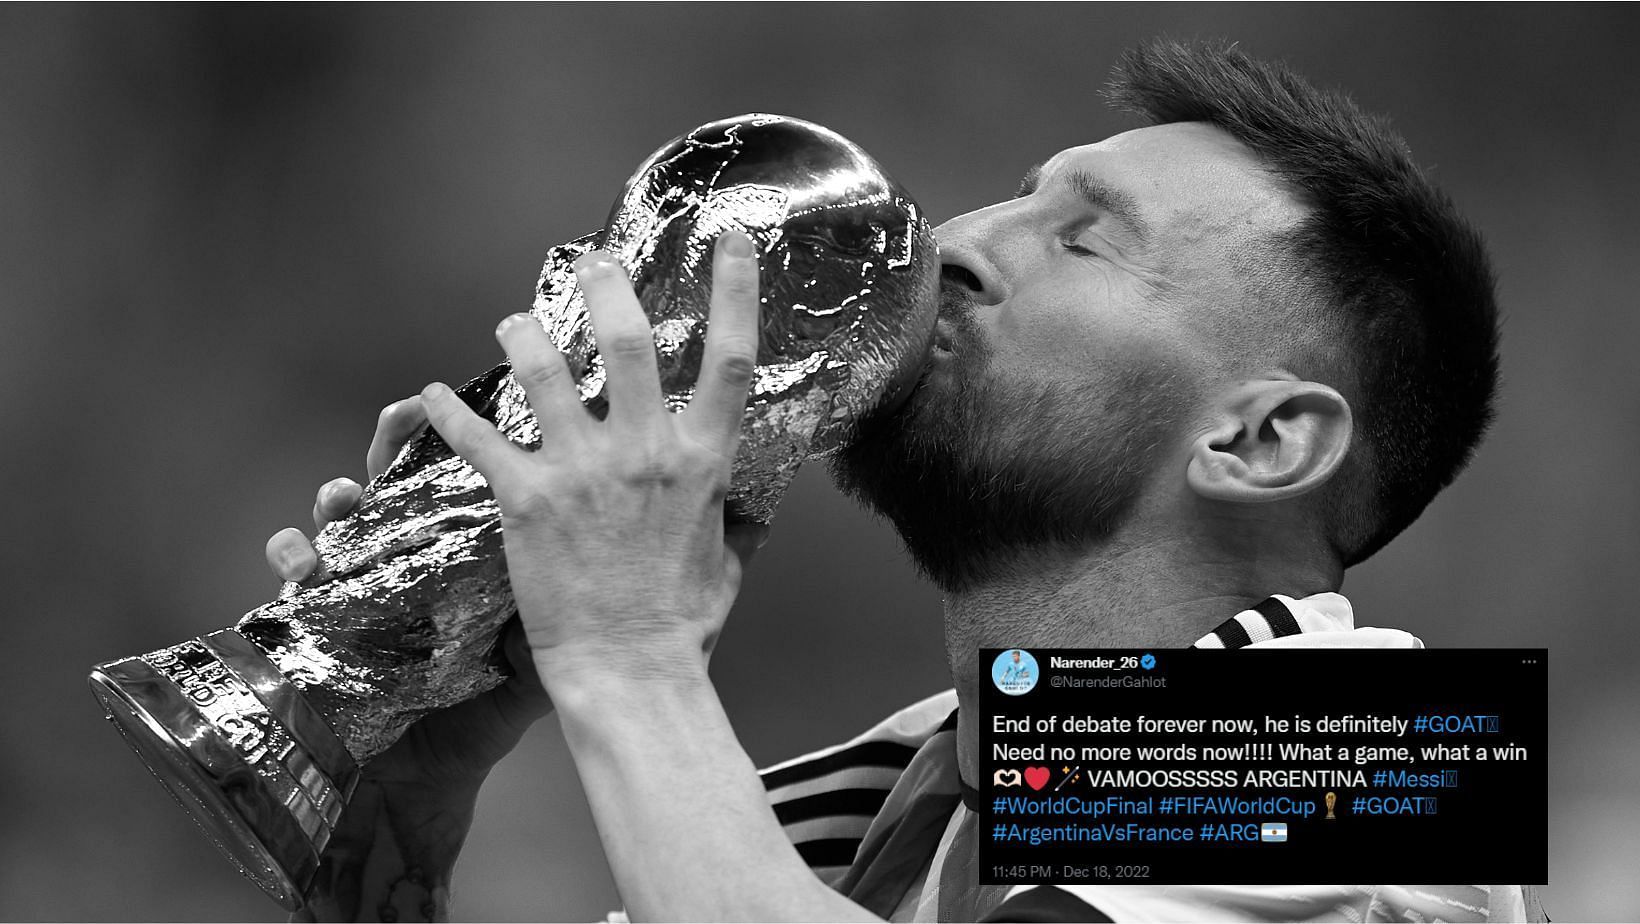 Lionel Messi celebrating with the World Cup trophy after Argentina